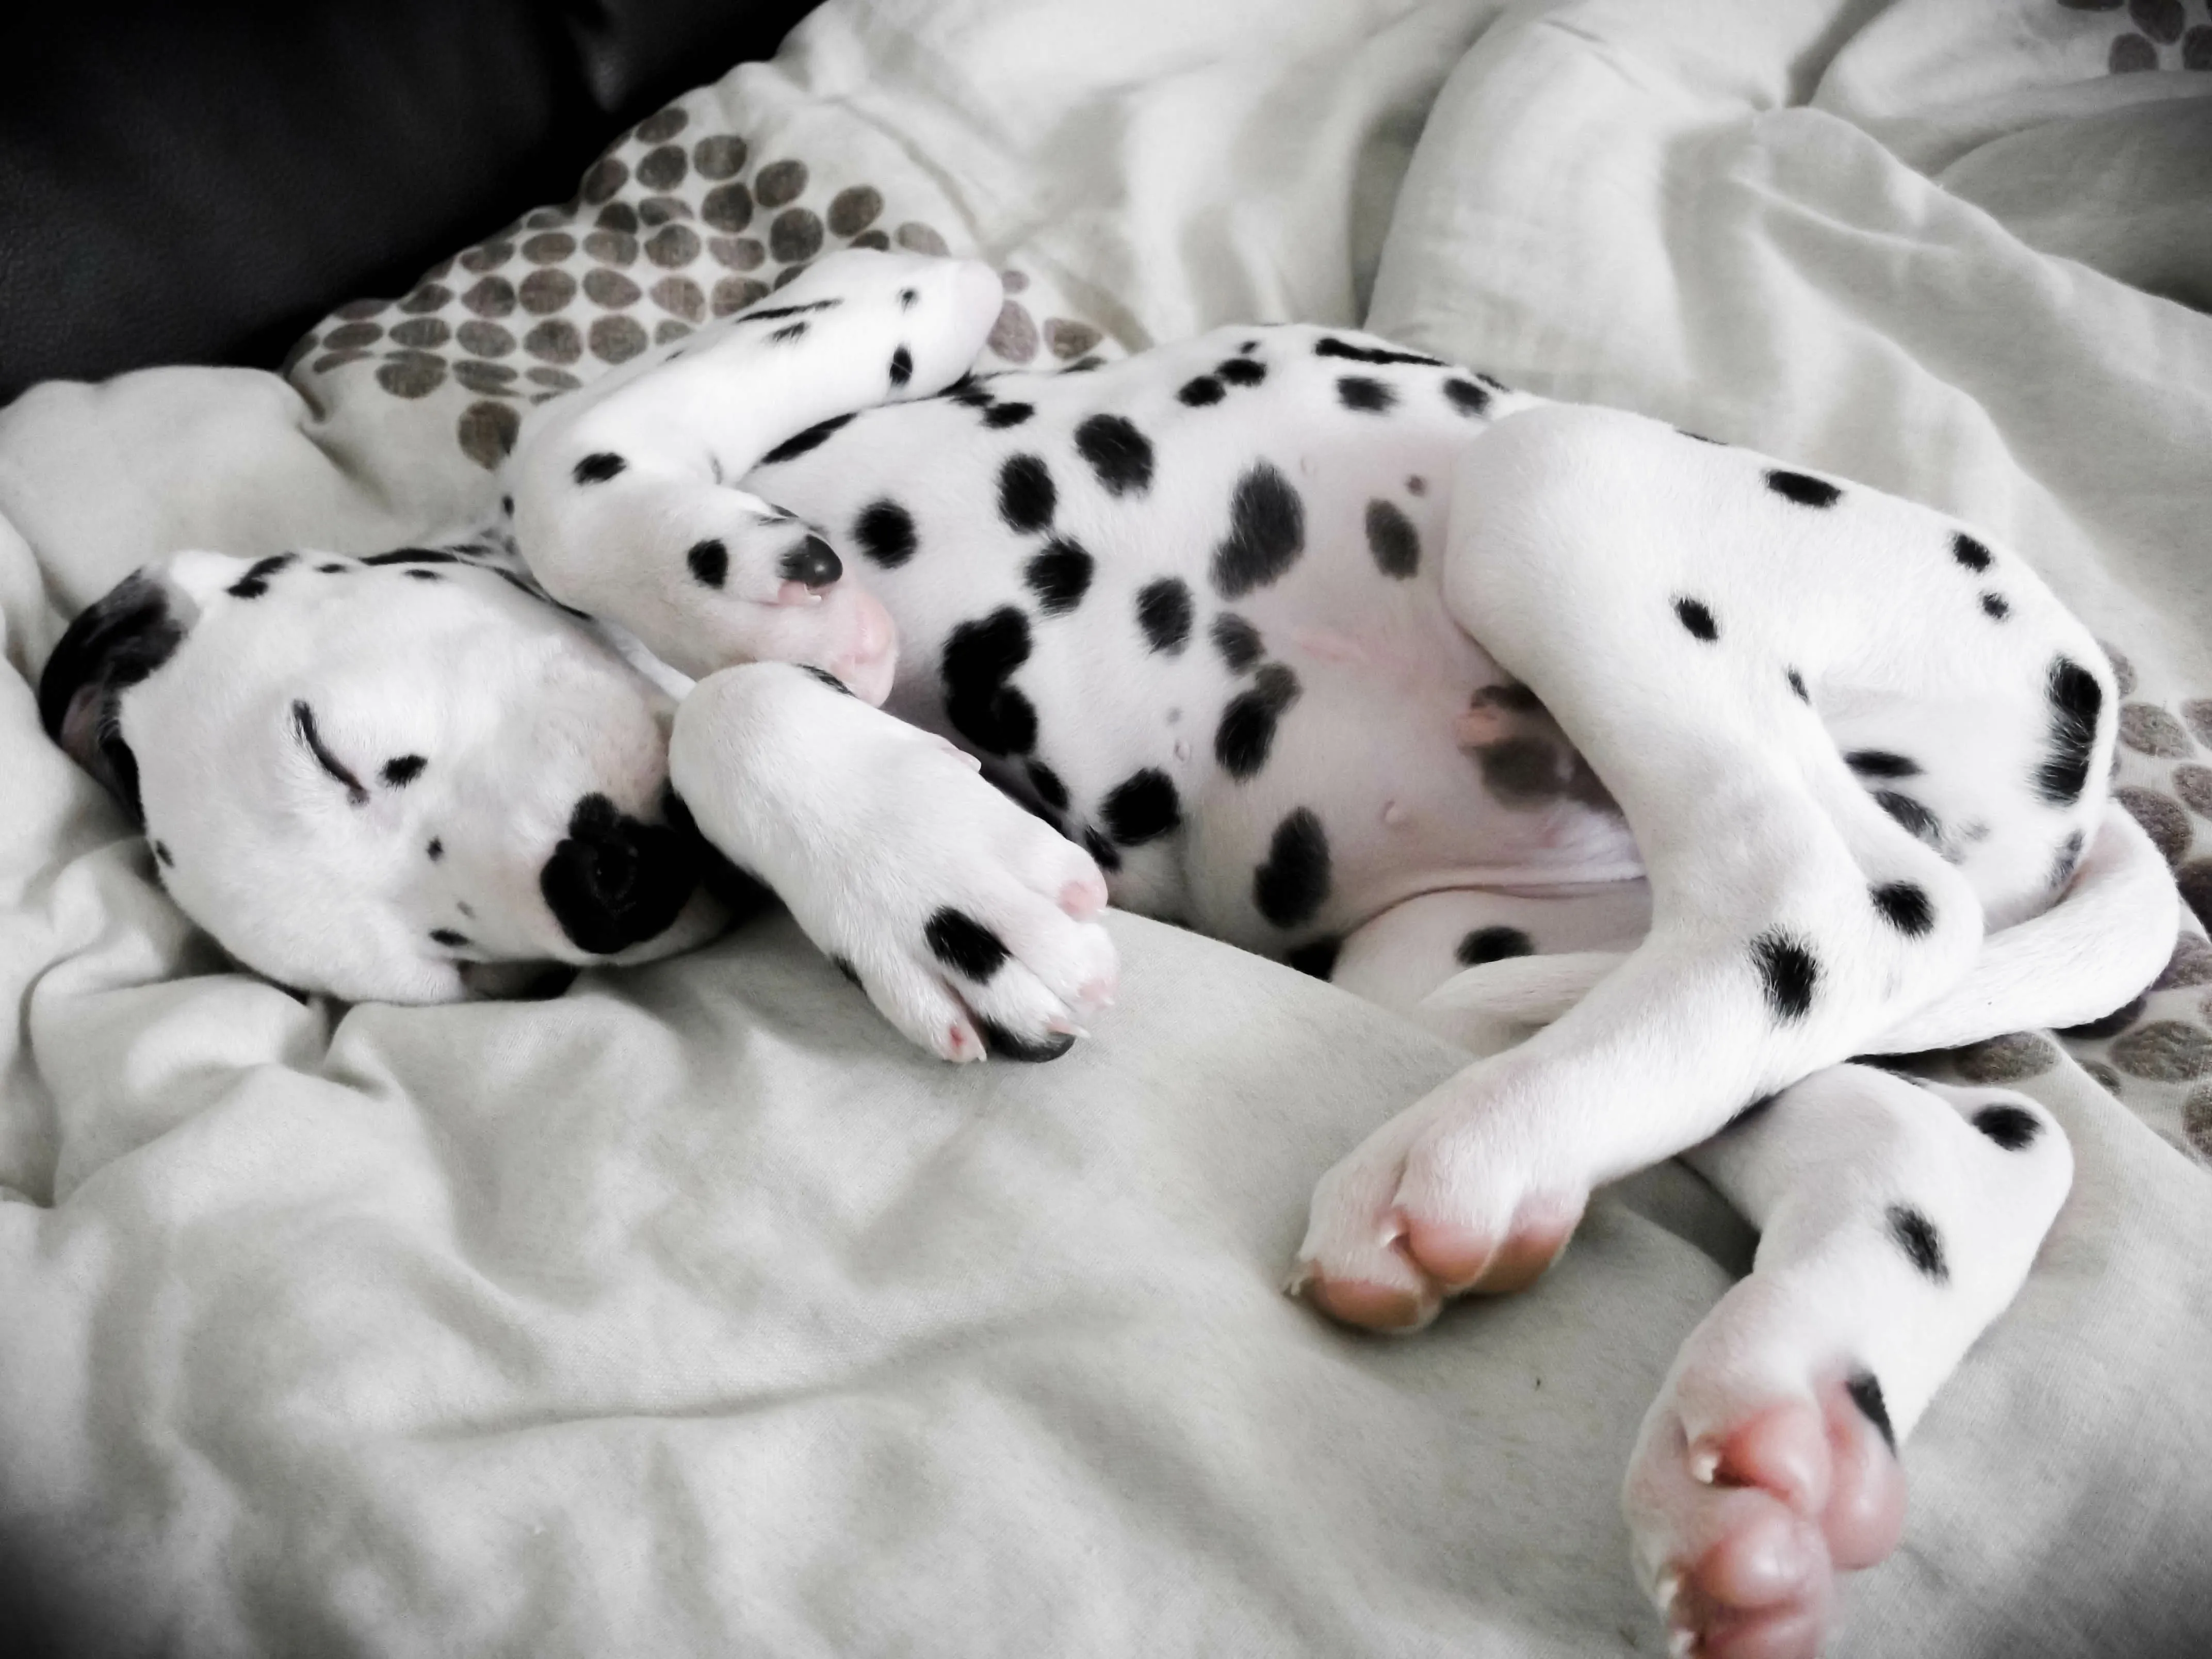 Dalmatian puppy napping on bed